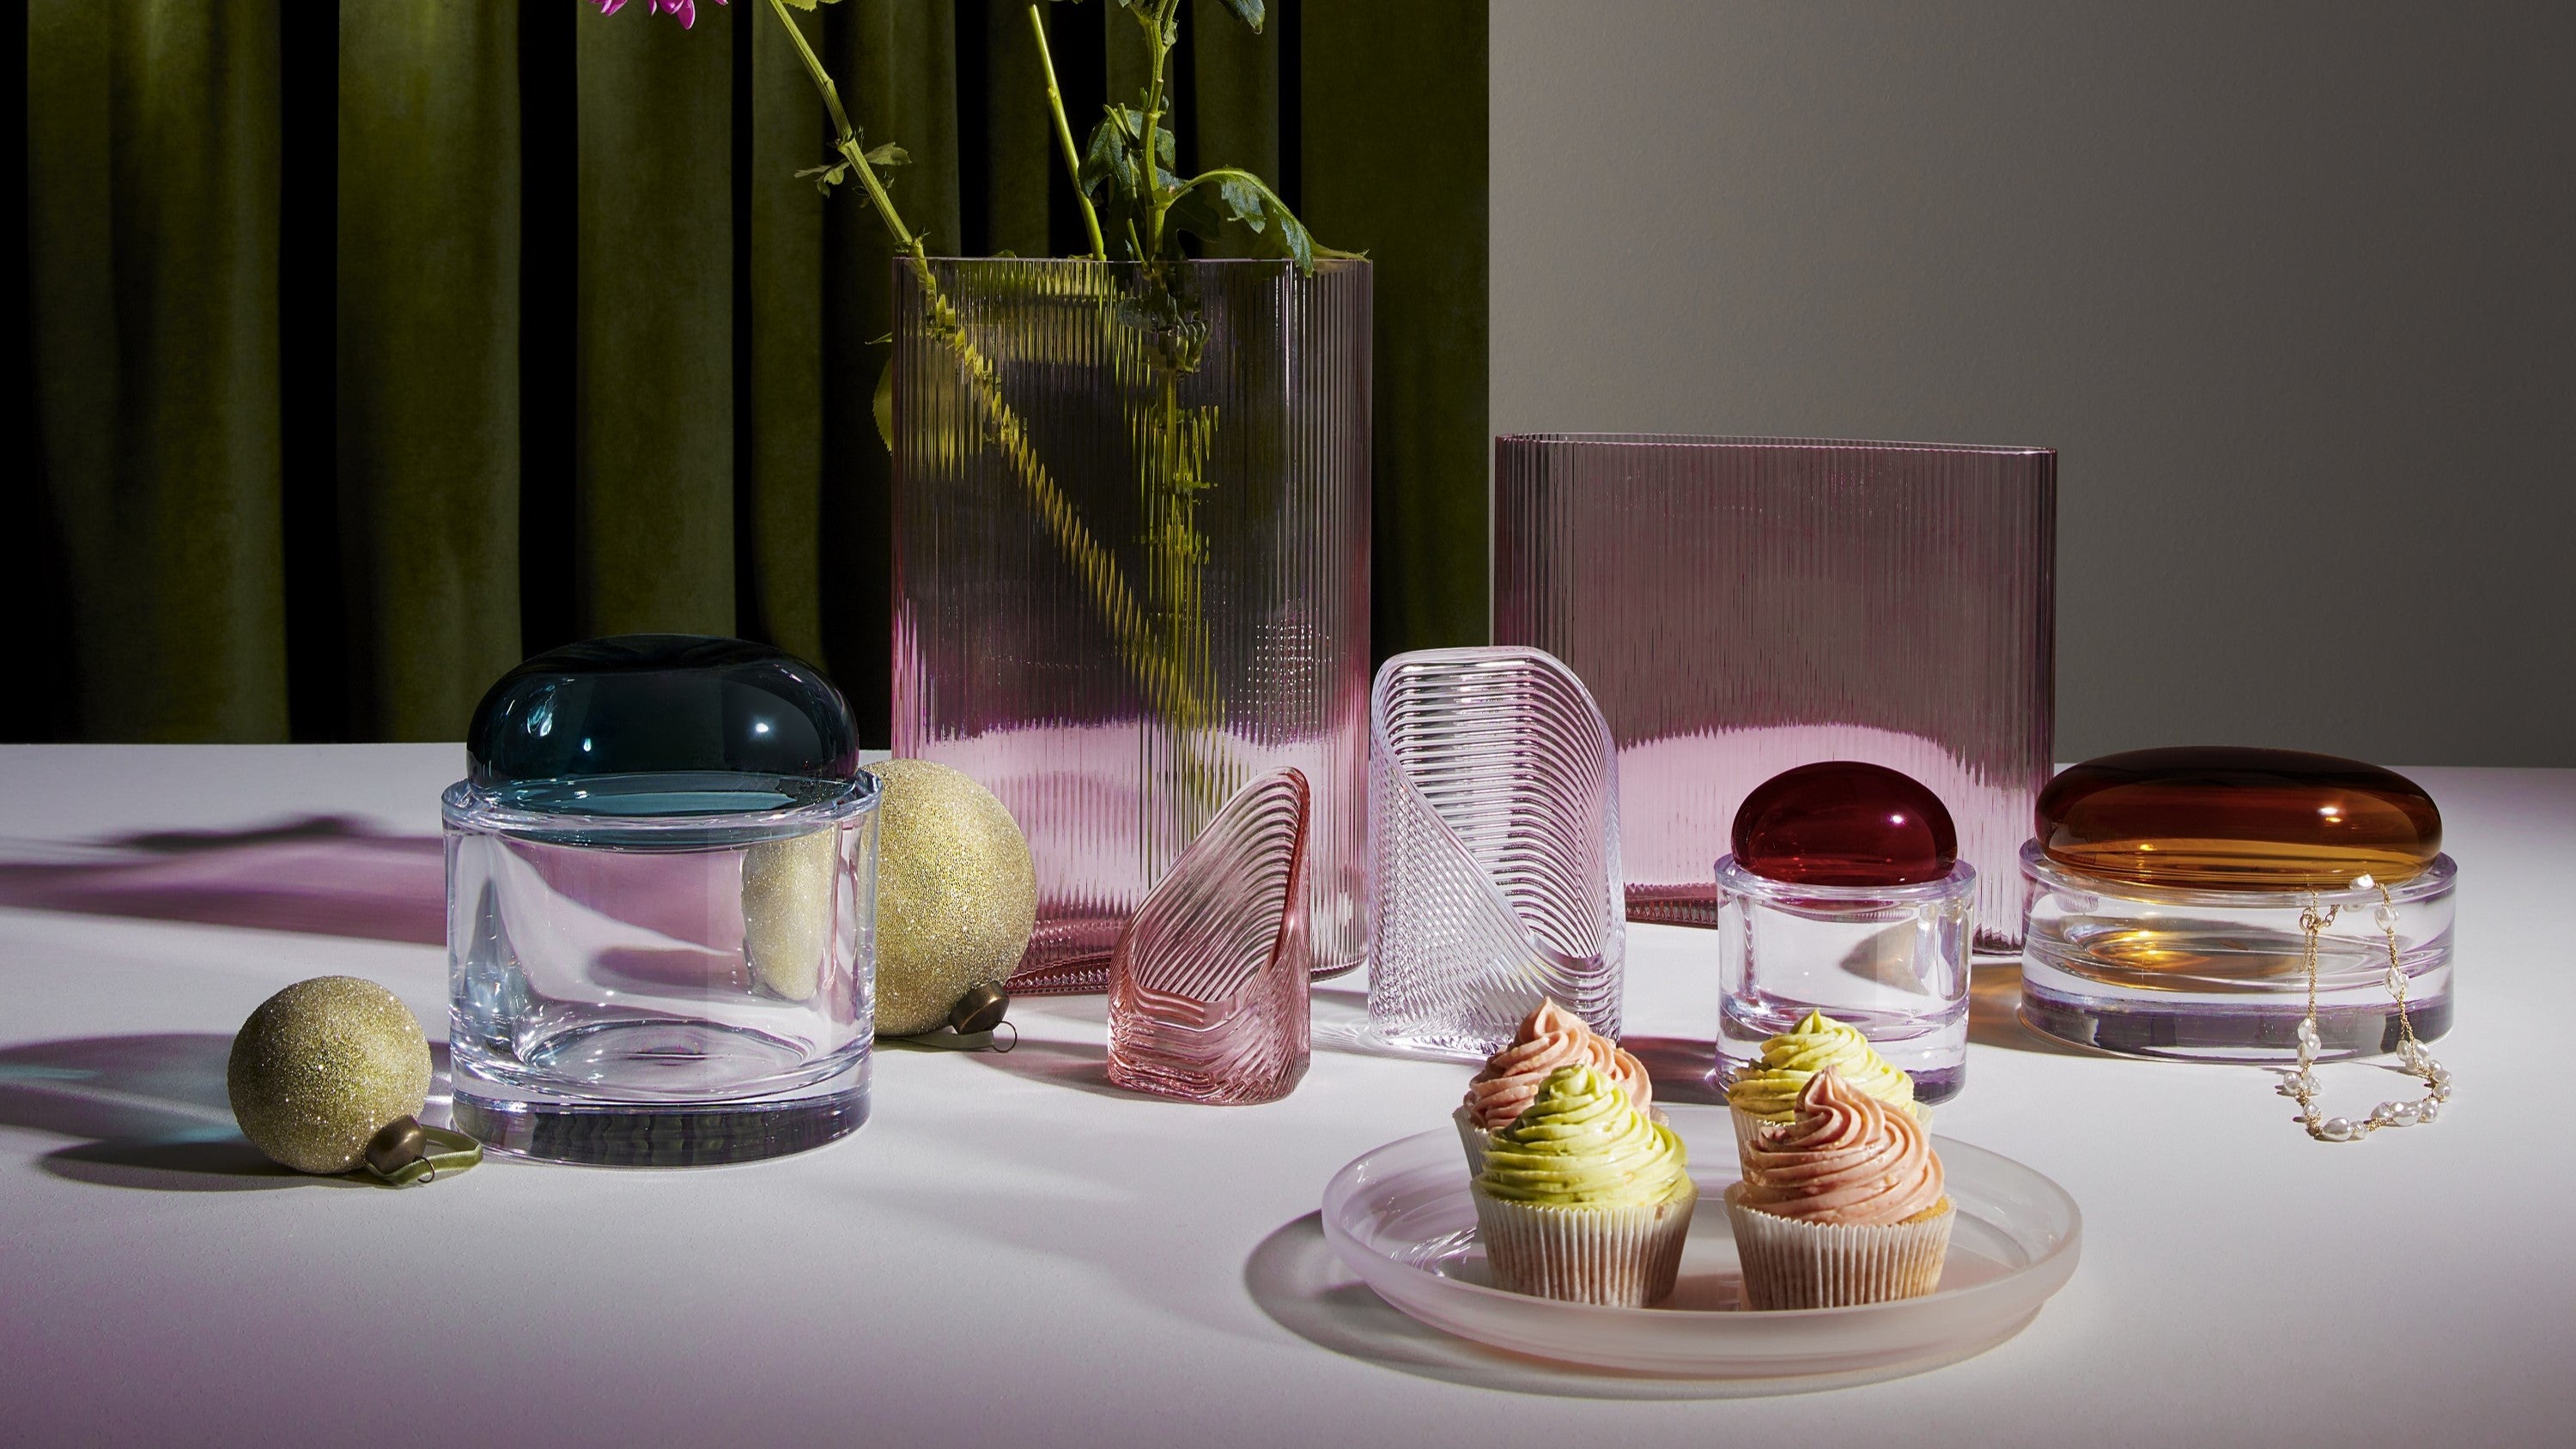 NUDE glass Ecrin collection of storage boxes, Mist Light votives presented with sweets